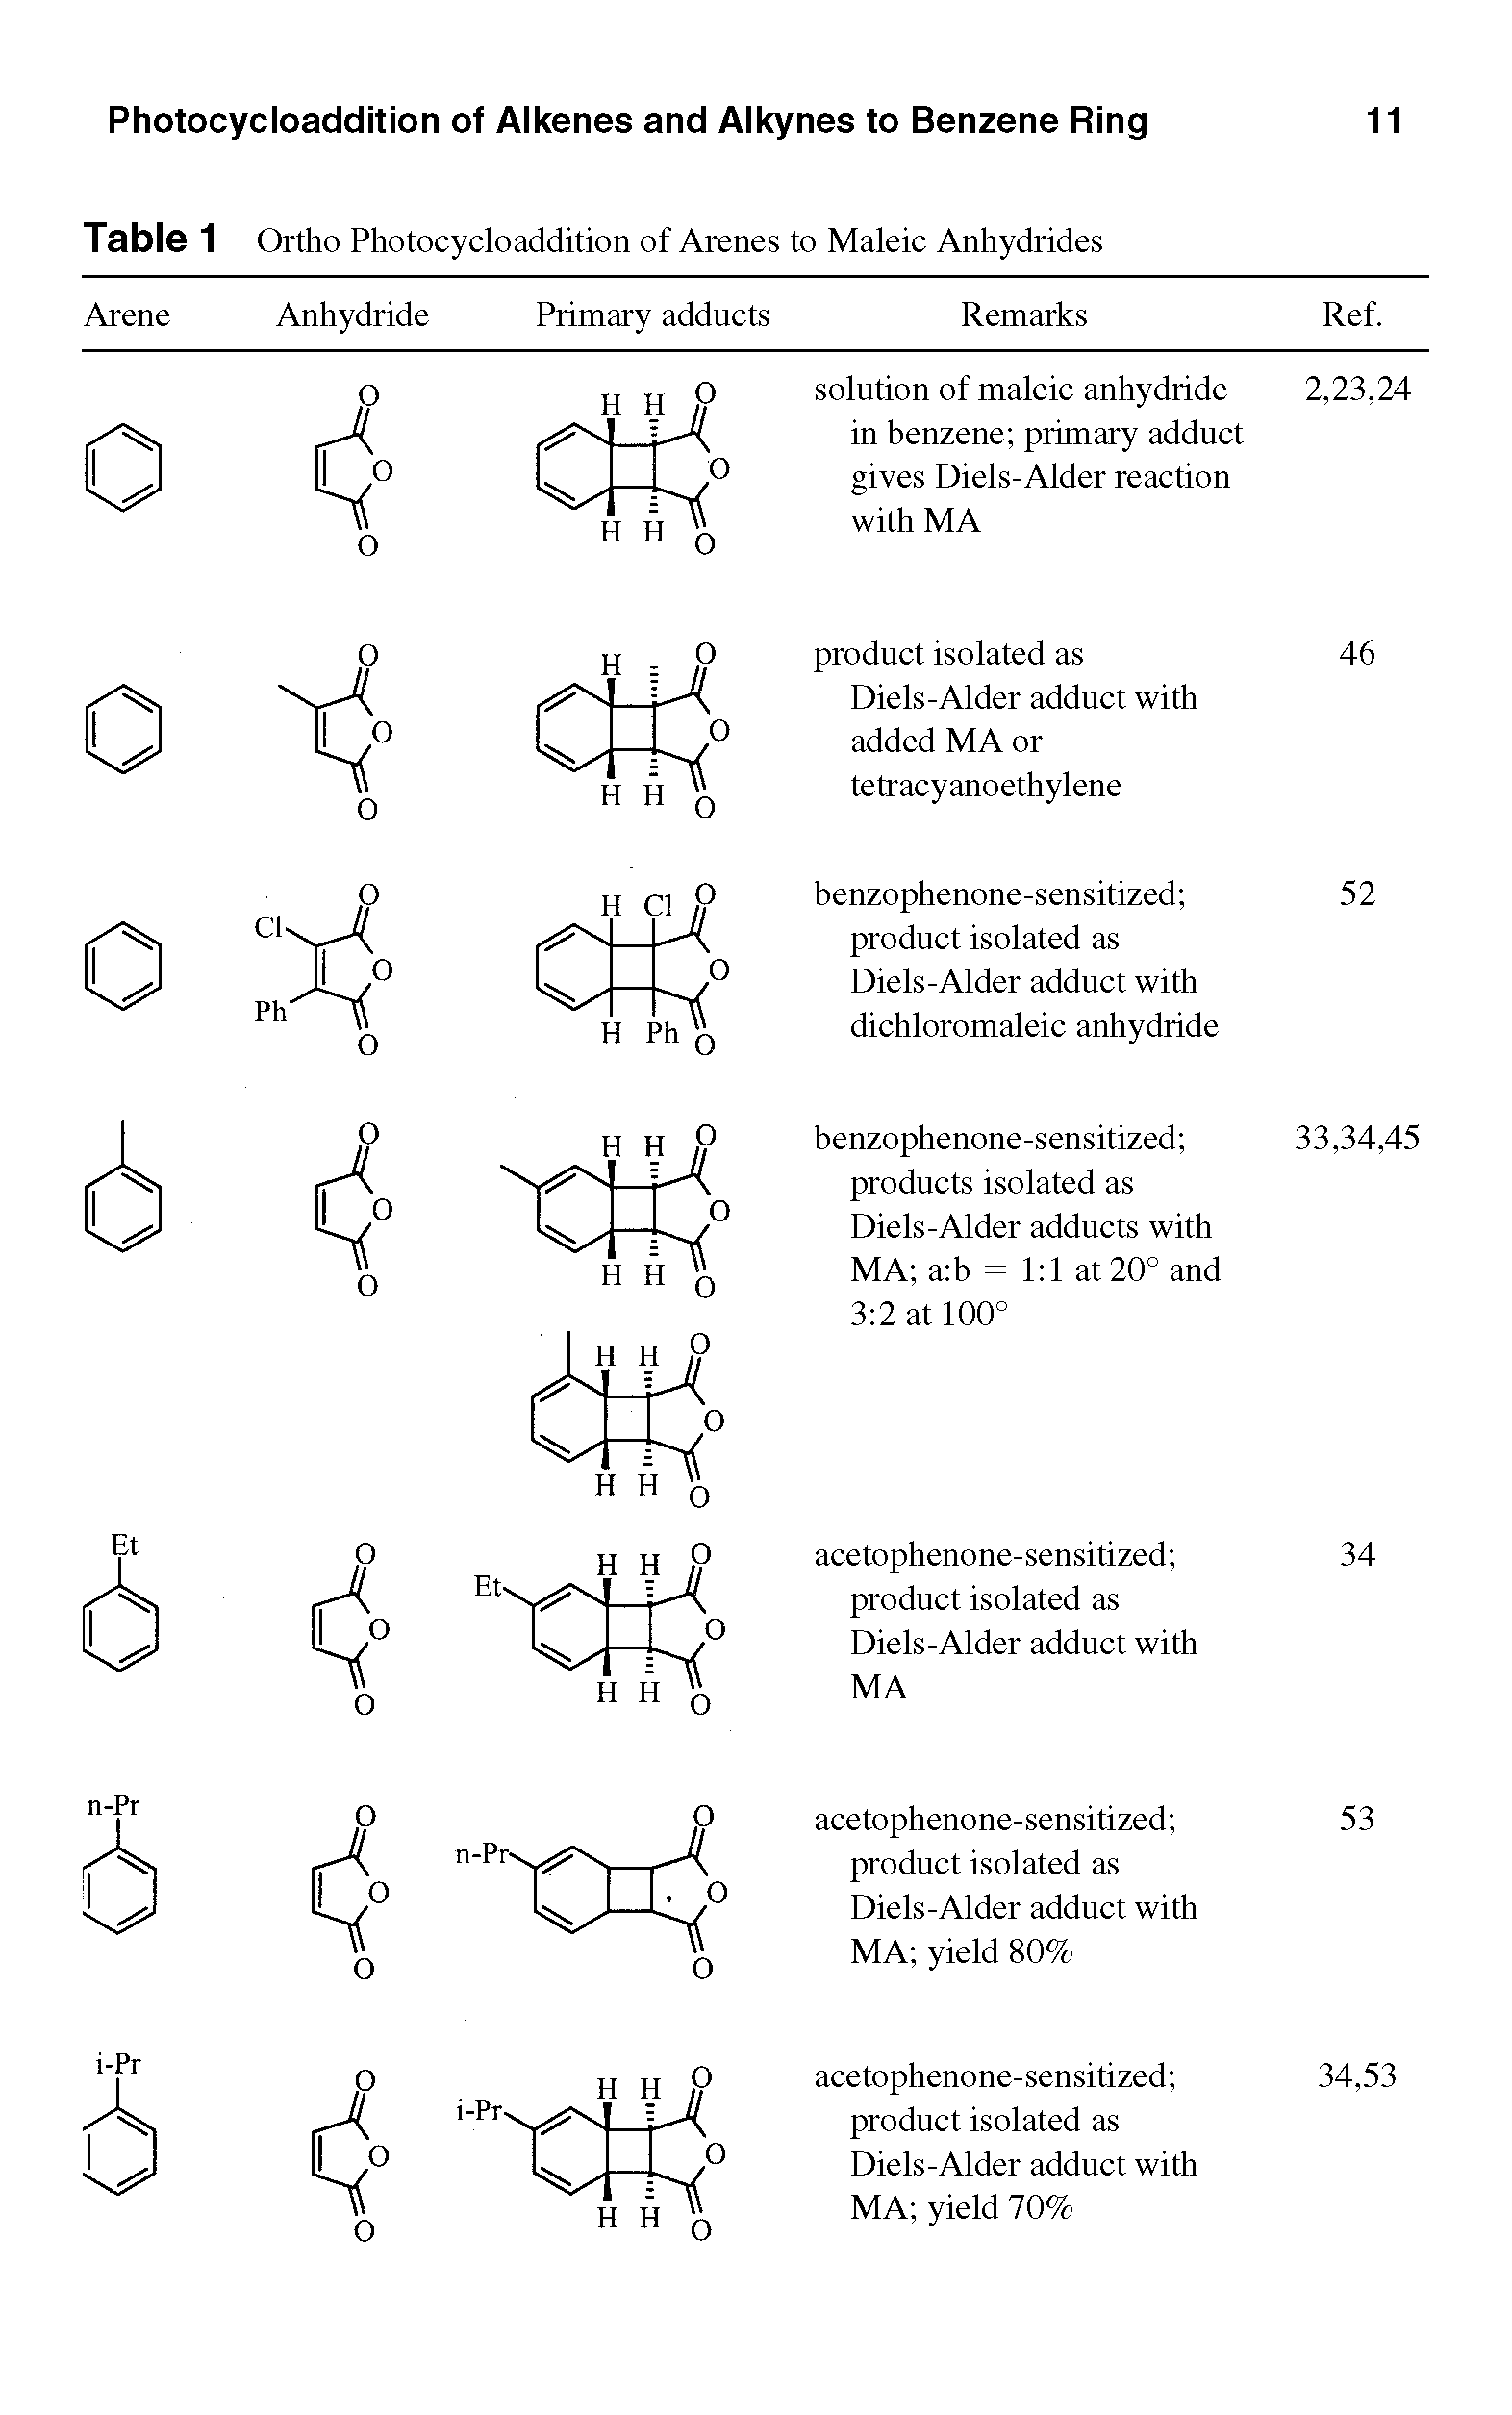 Table 1 Ortho Photocycloaddition of Arenes to Maleic Anhydrides...